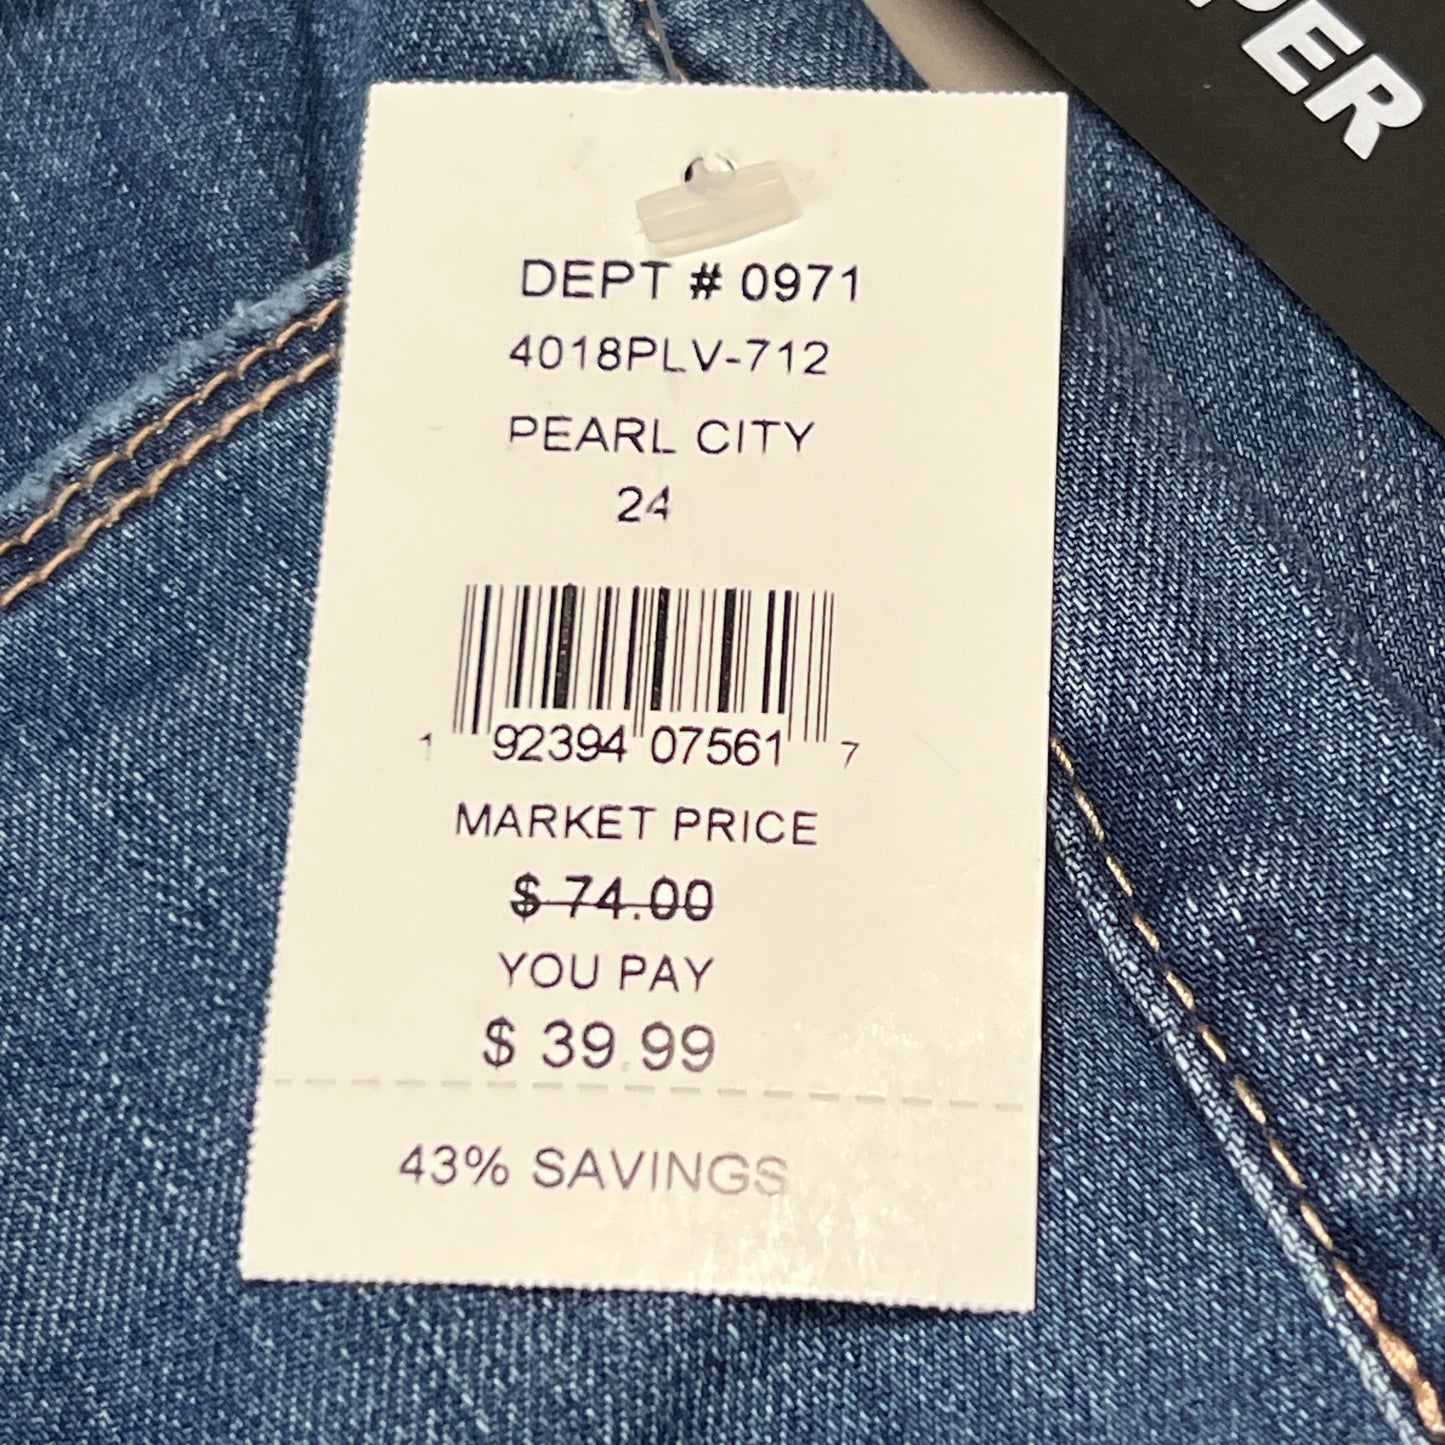 ARTICLES OF SOCIETY Pearl City Denim Jeans Women's Sz 24 Blue 4018PLV-712 (New)